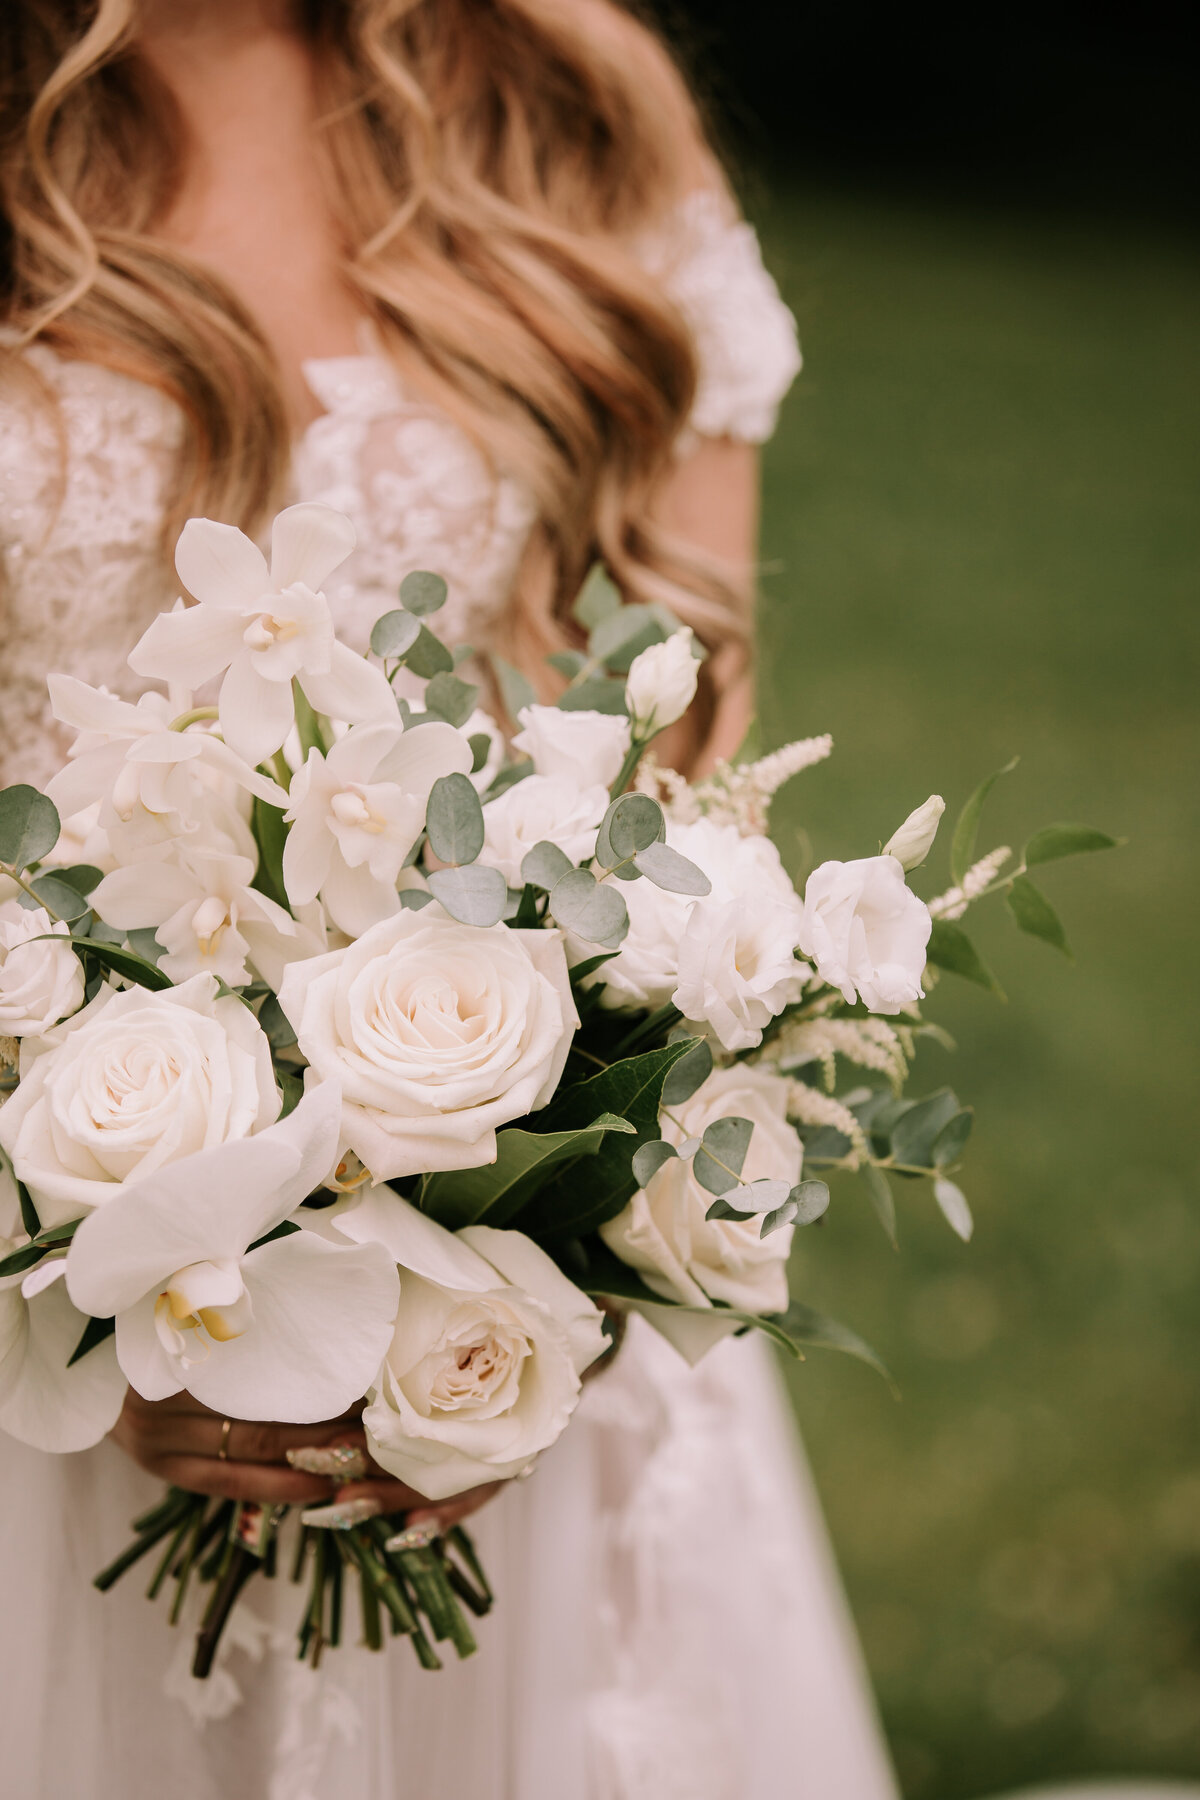 Stunning and elegant bouquet of white roses created by Hen & Chicks, classic Calgary, Alberta wedding florist, featured on the Brontë Bride Vendor Guide.